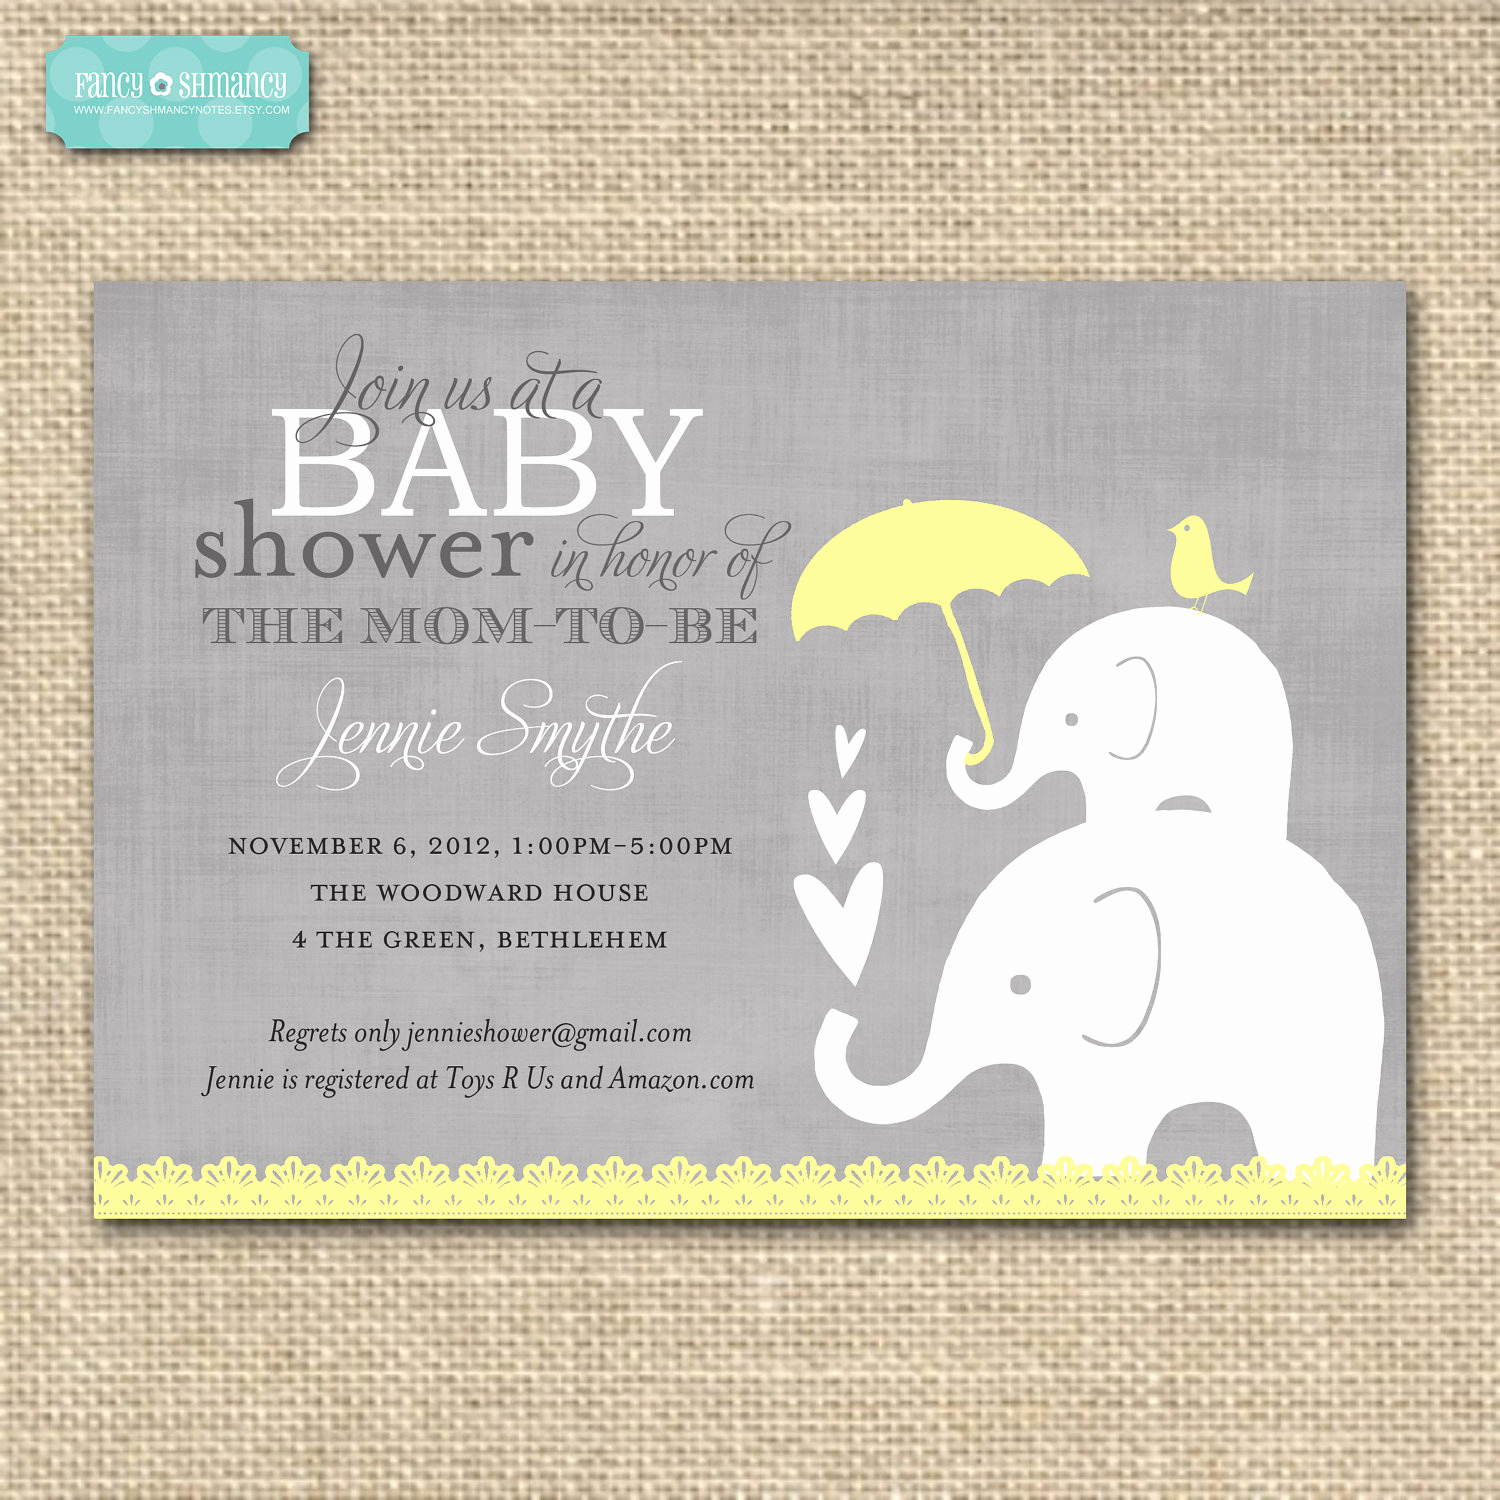 Baby Shower Invitation themes Beautiful Baby Shower Invitationelephant Yellow and by